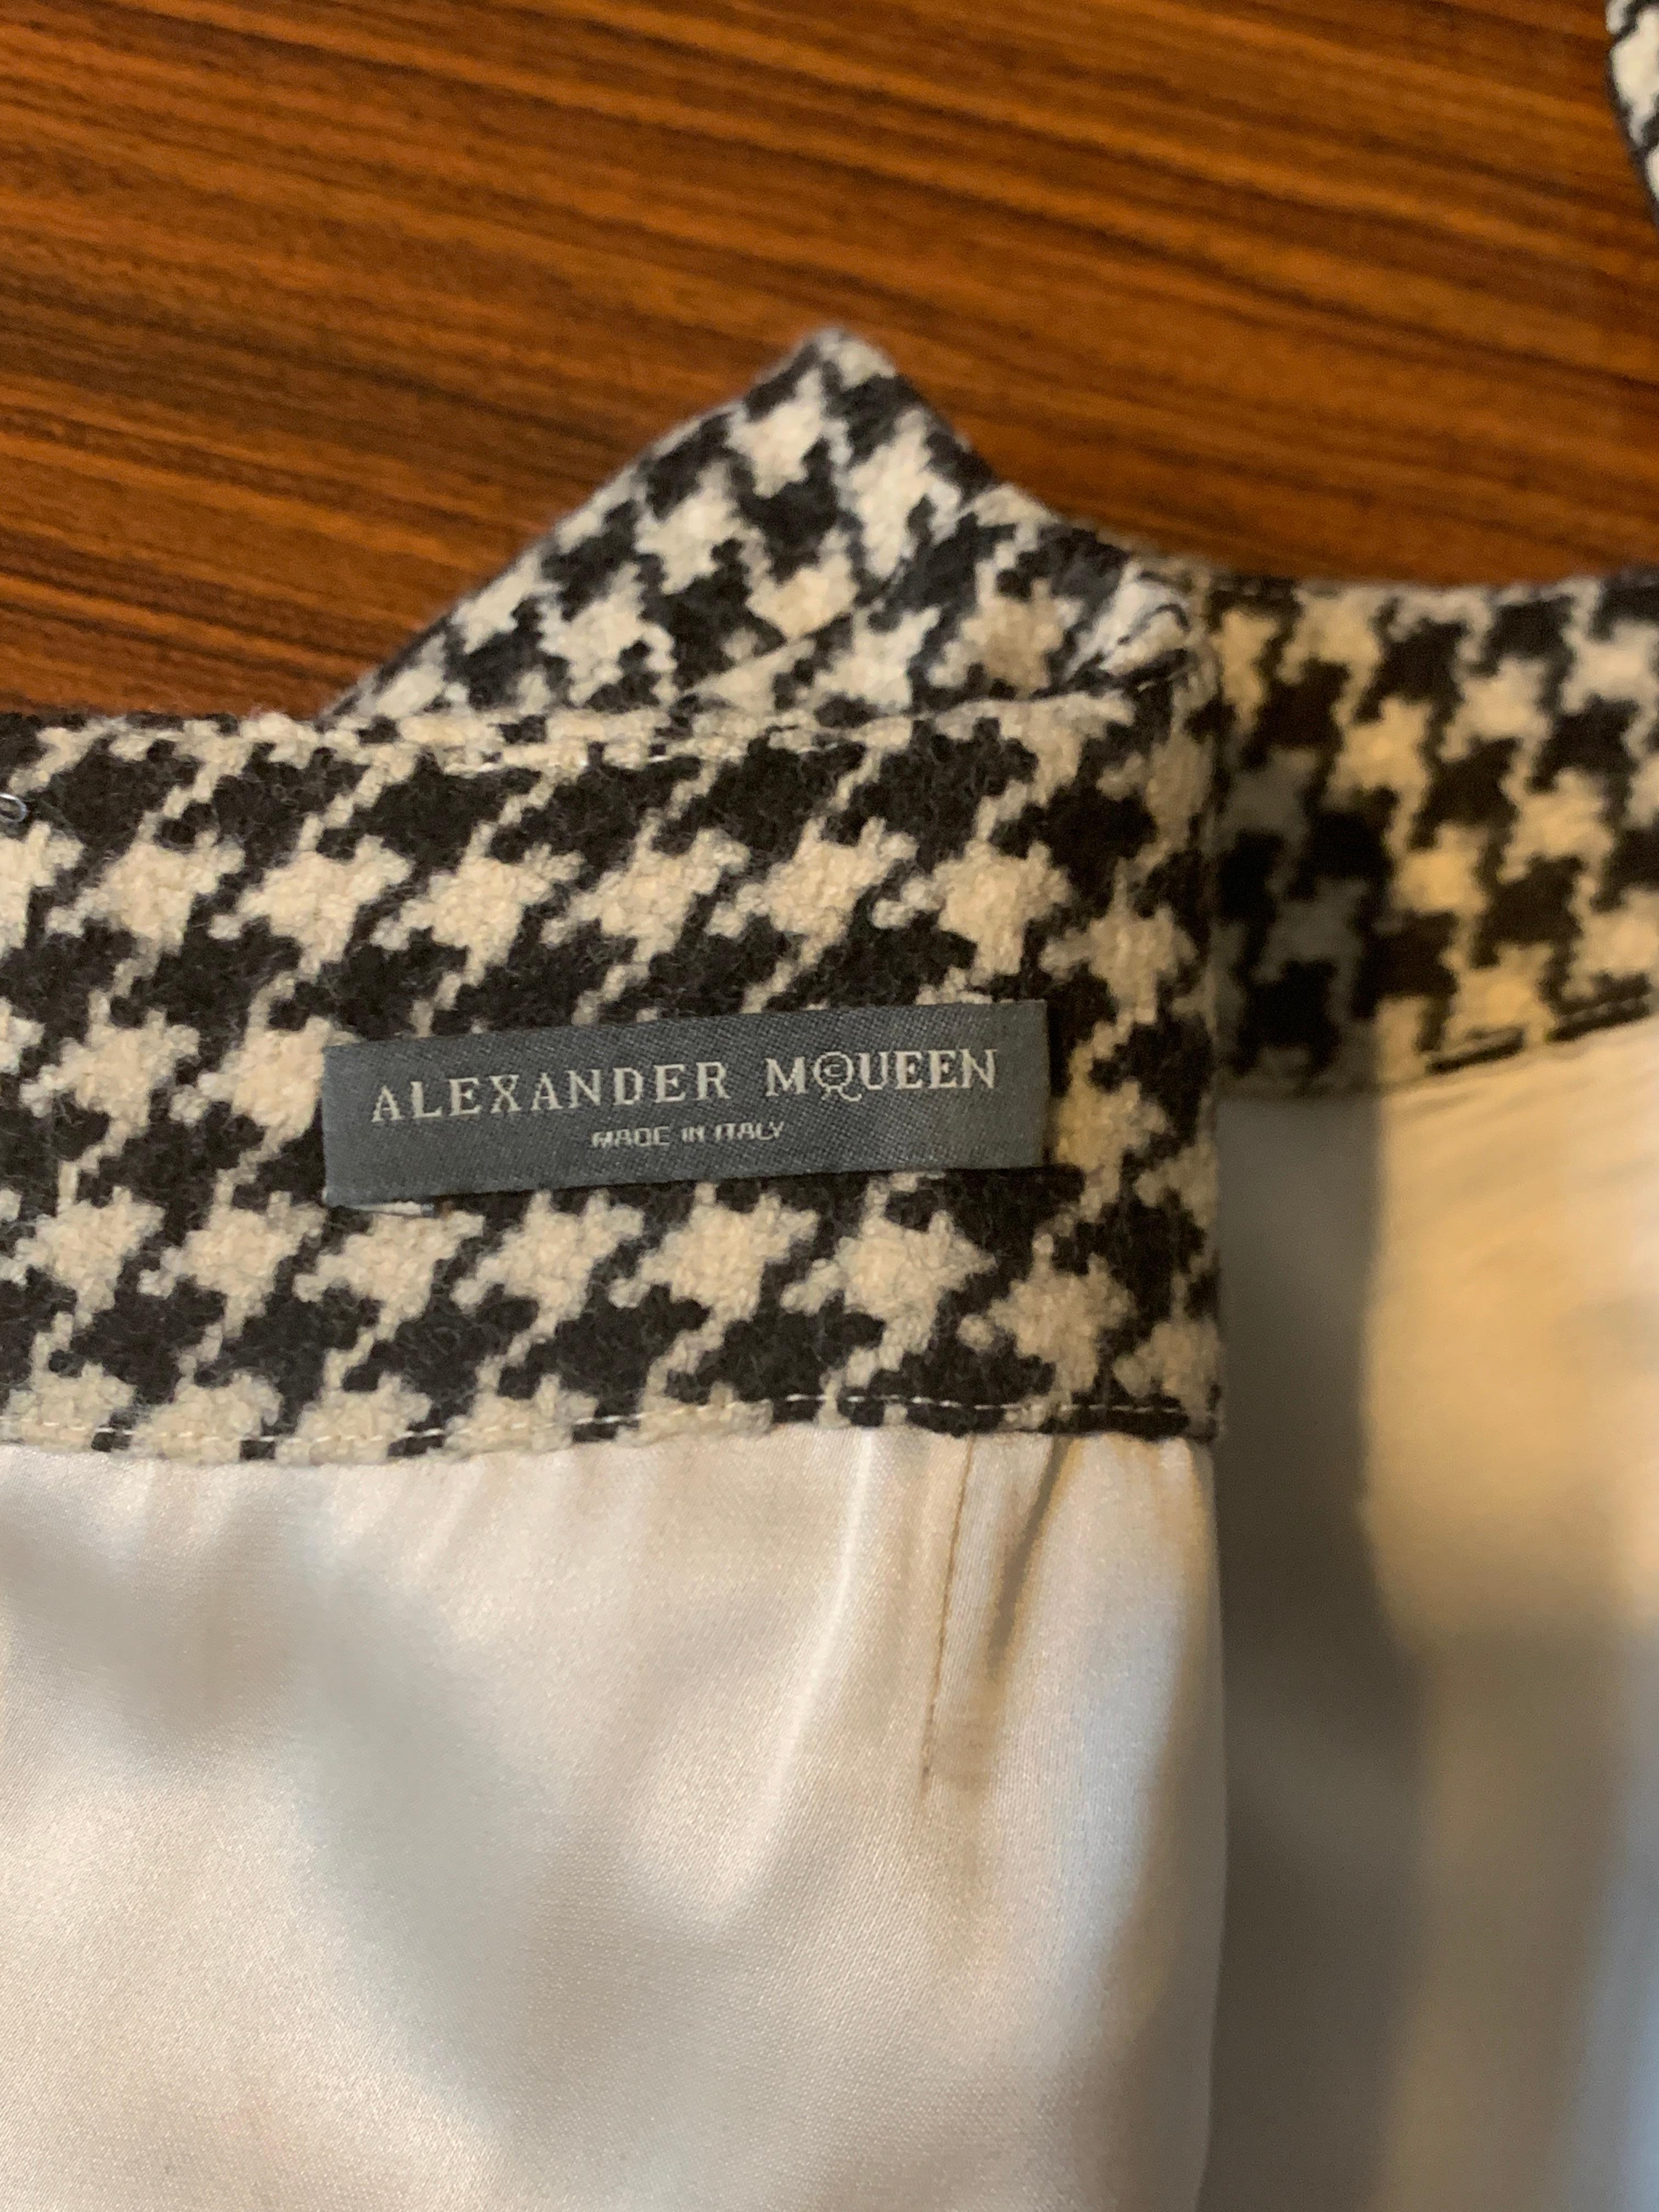 Alexander Mcqueen 2009 Wool Black and White Houndstooth Dogtooth Check Dress In Excellent Condition For Sale In San Francisco, CA